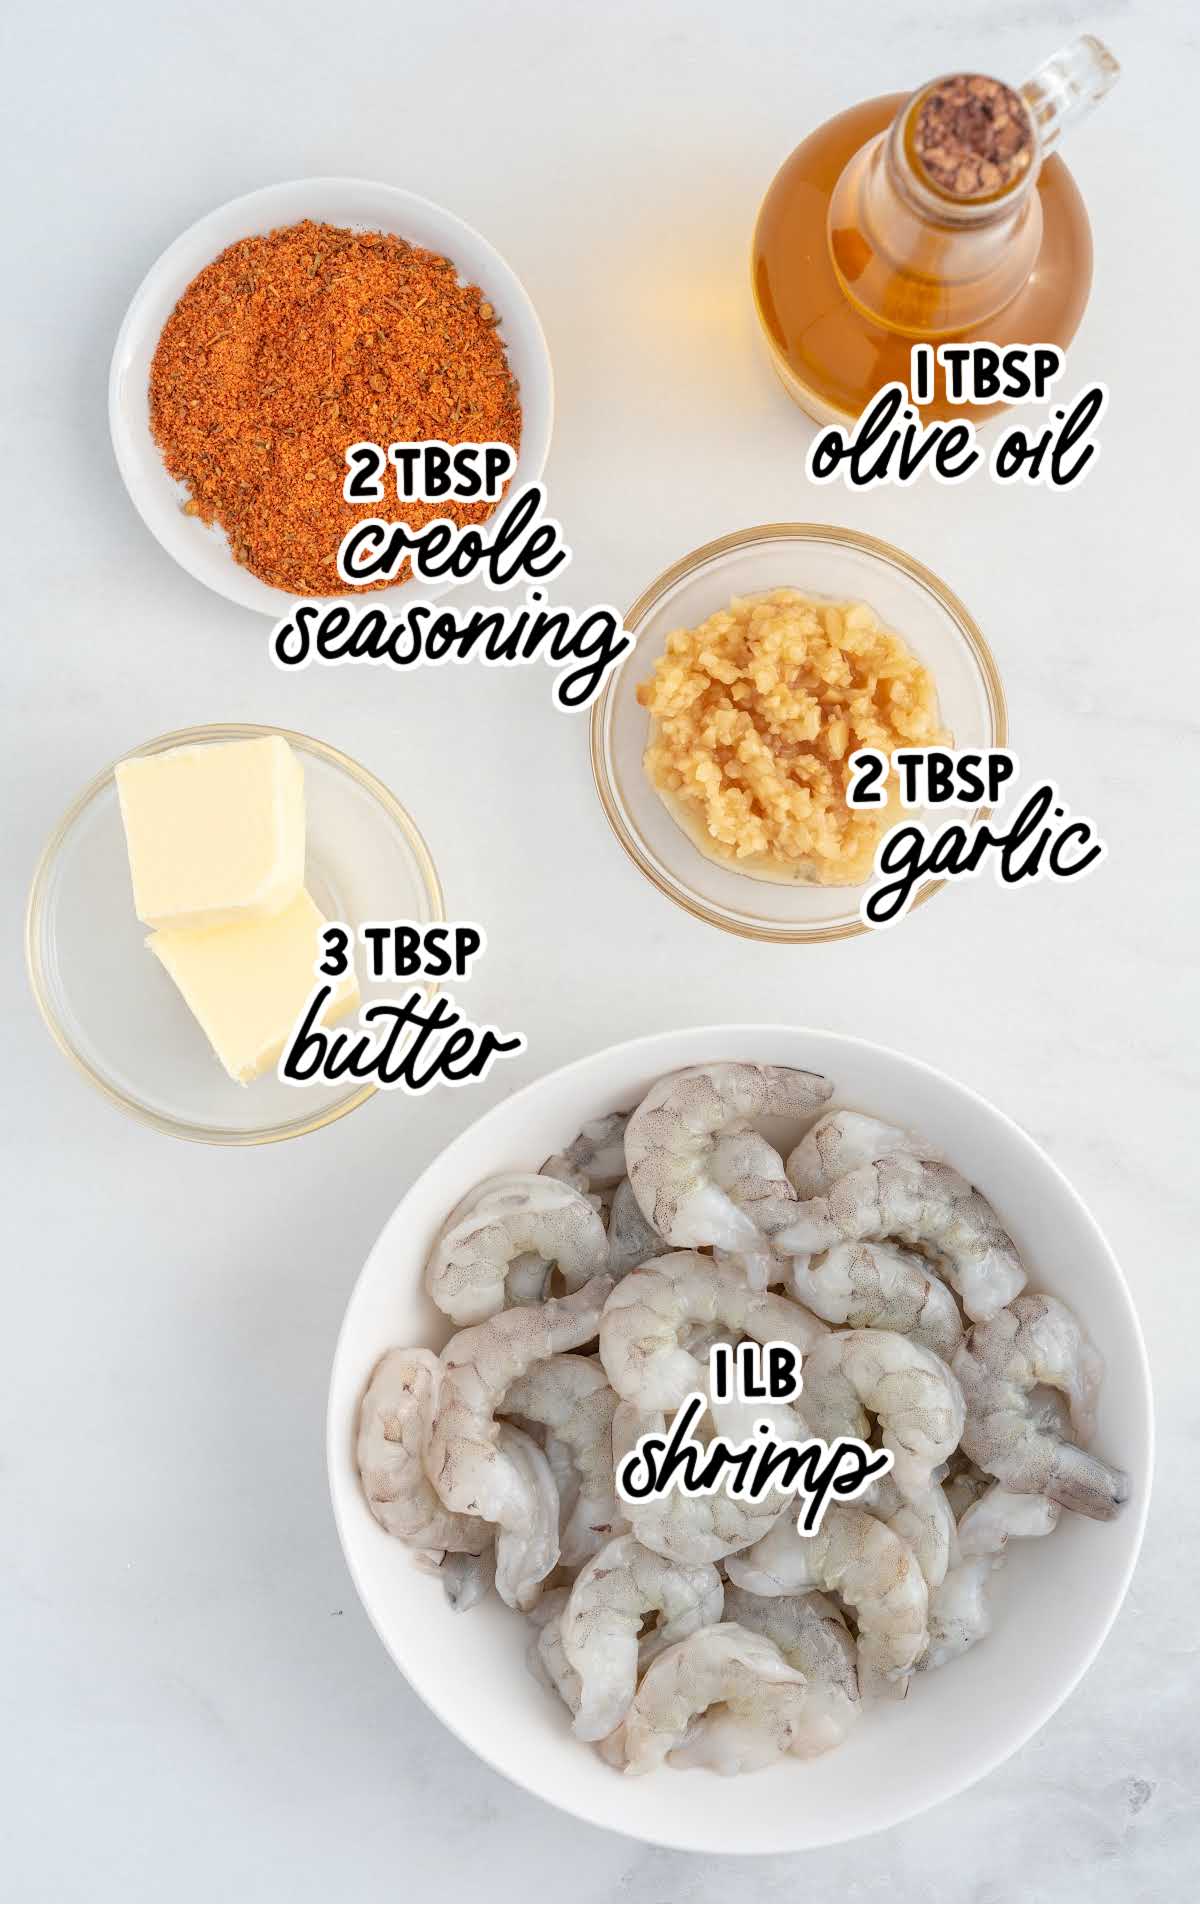 Cajun Shrimp raw ingredients that are labeled